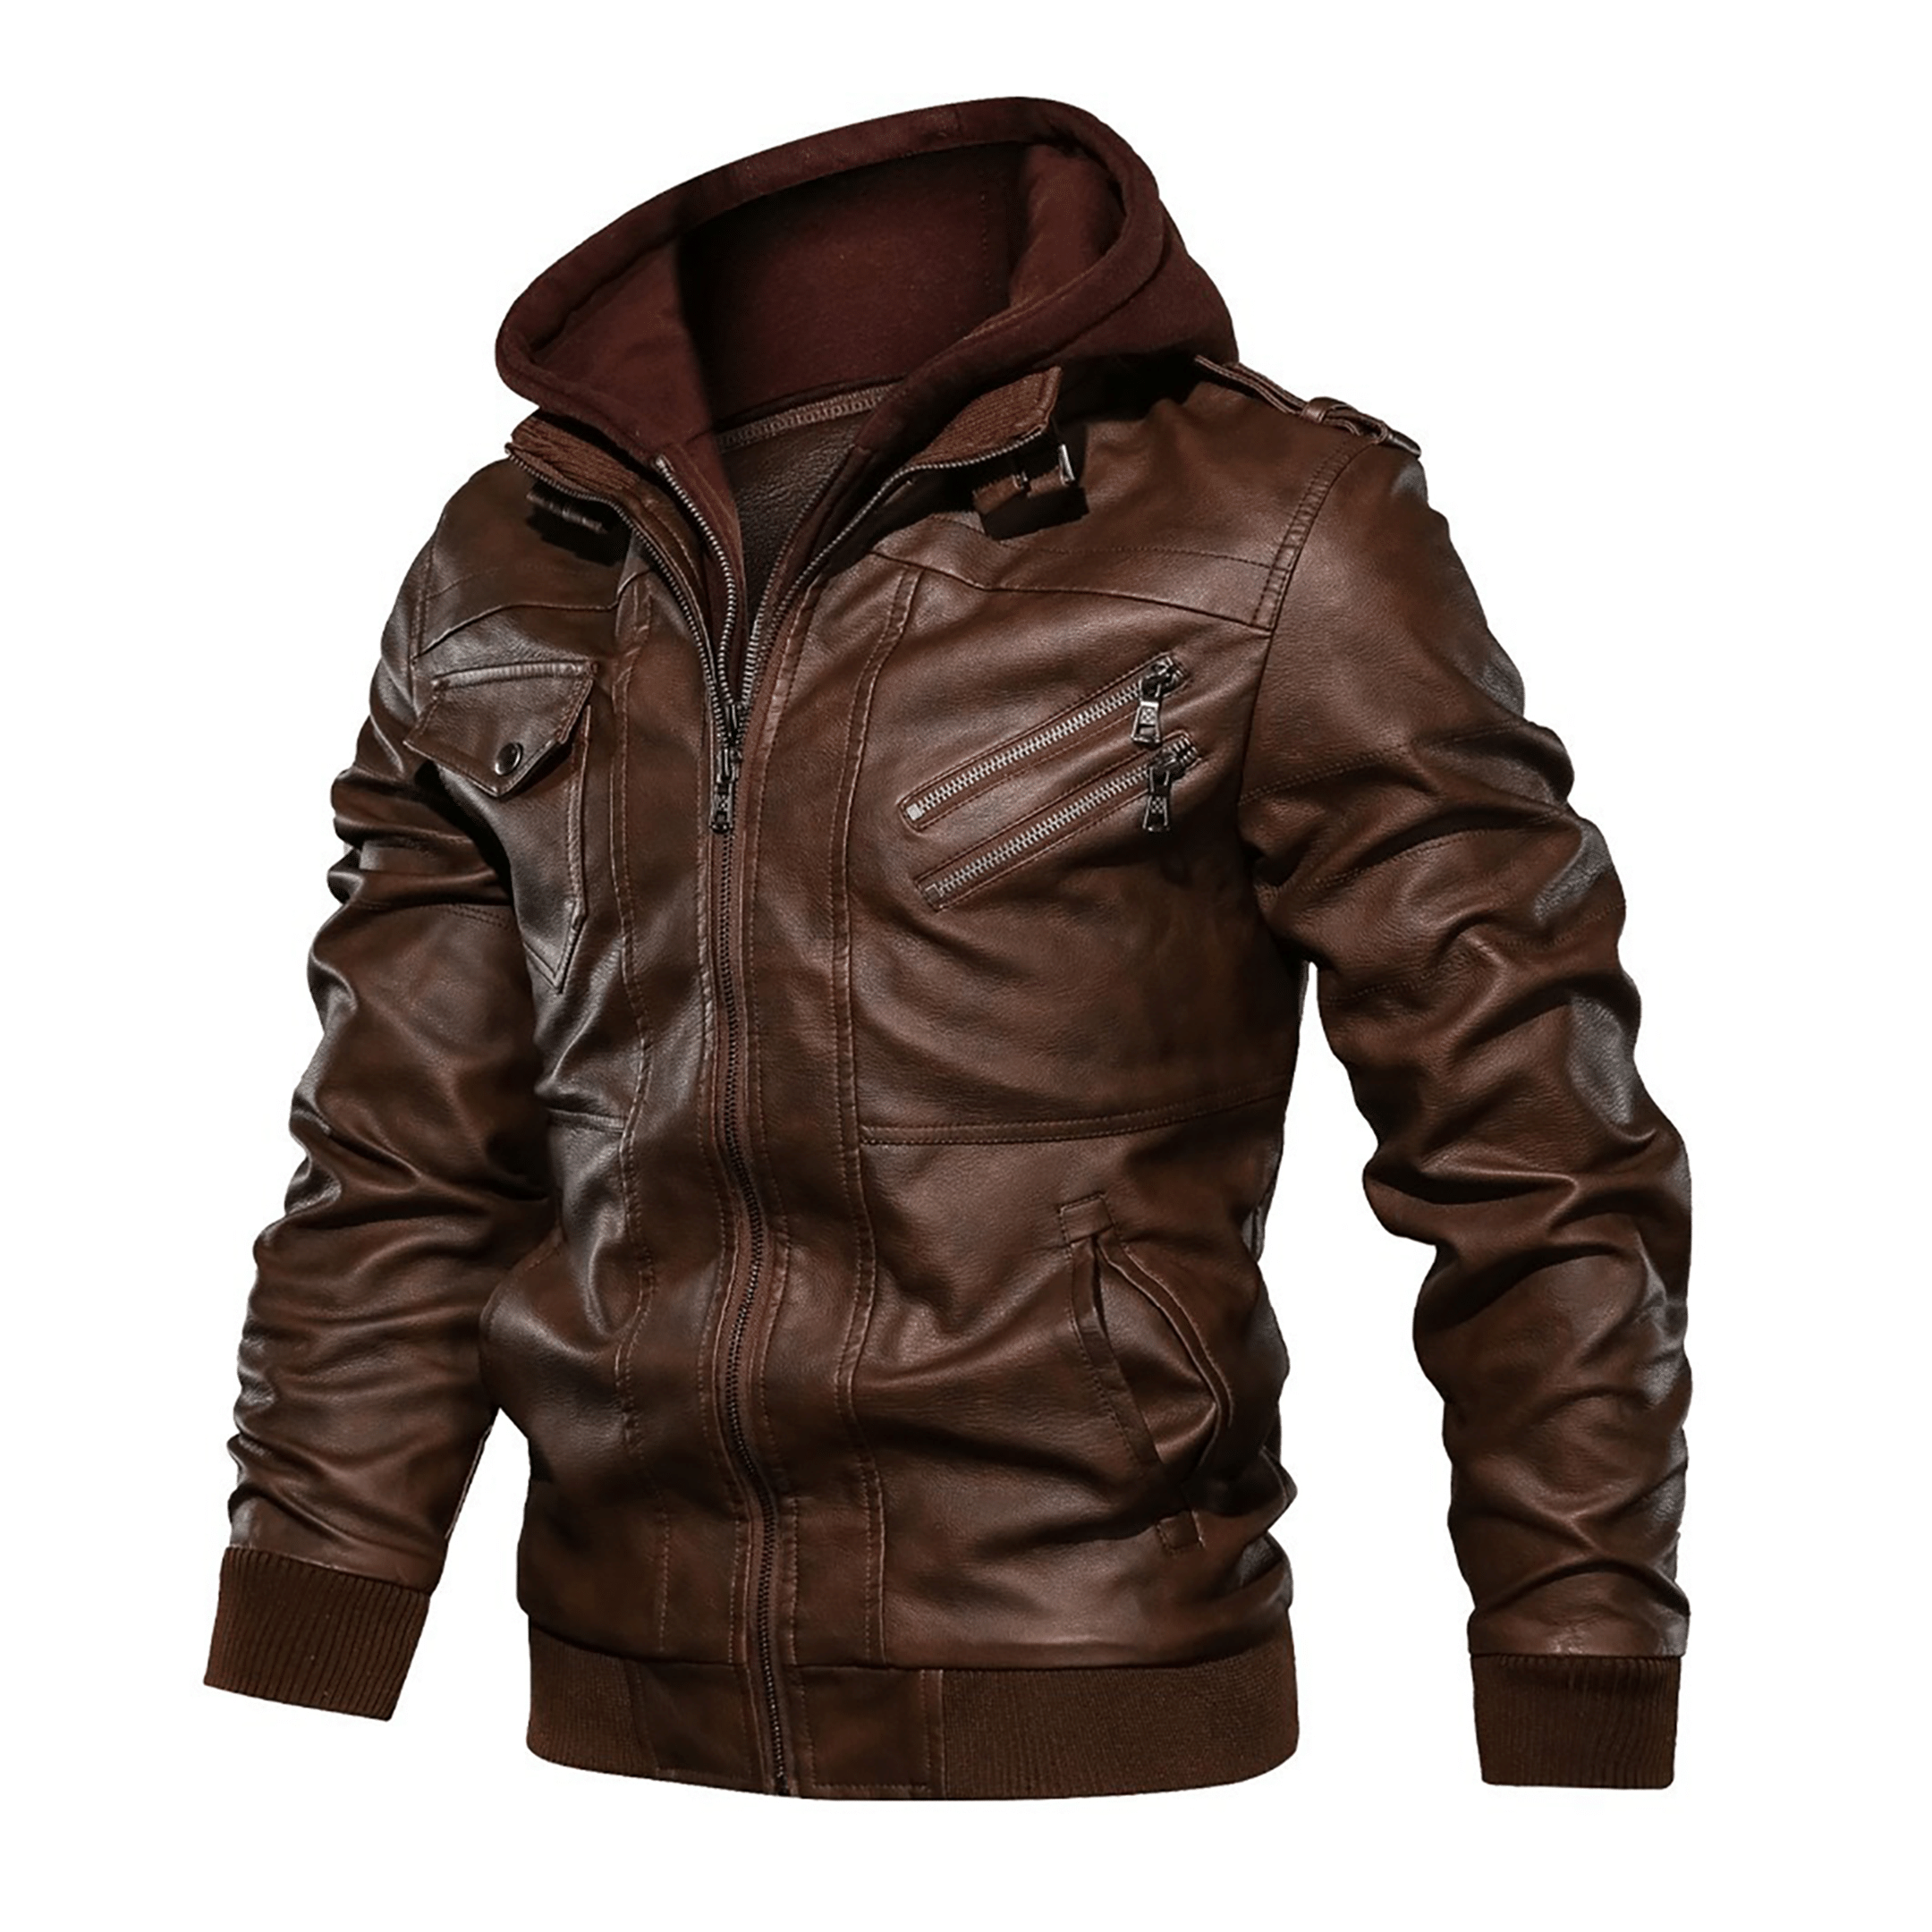 Top leather jackets and latest products 405